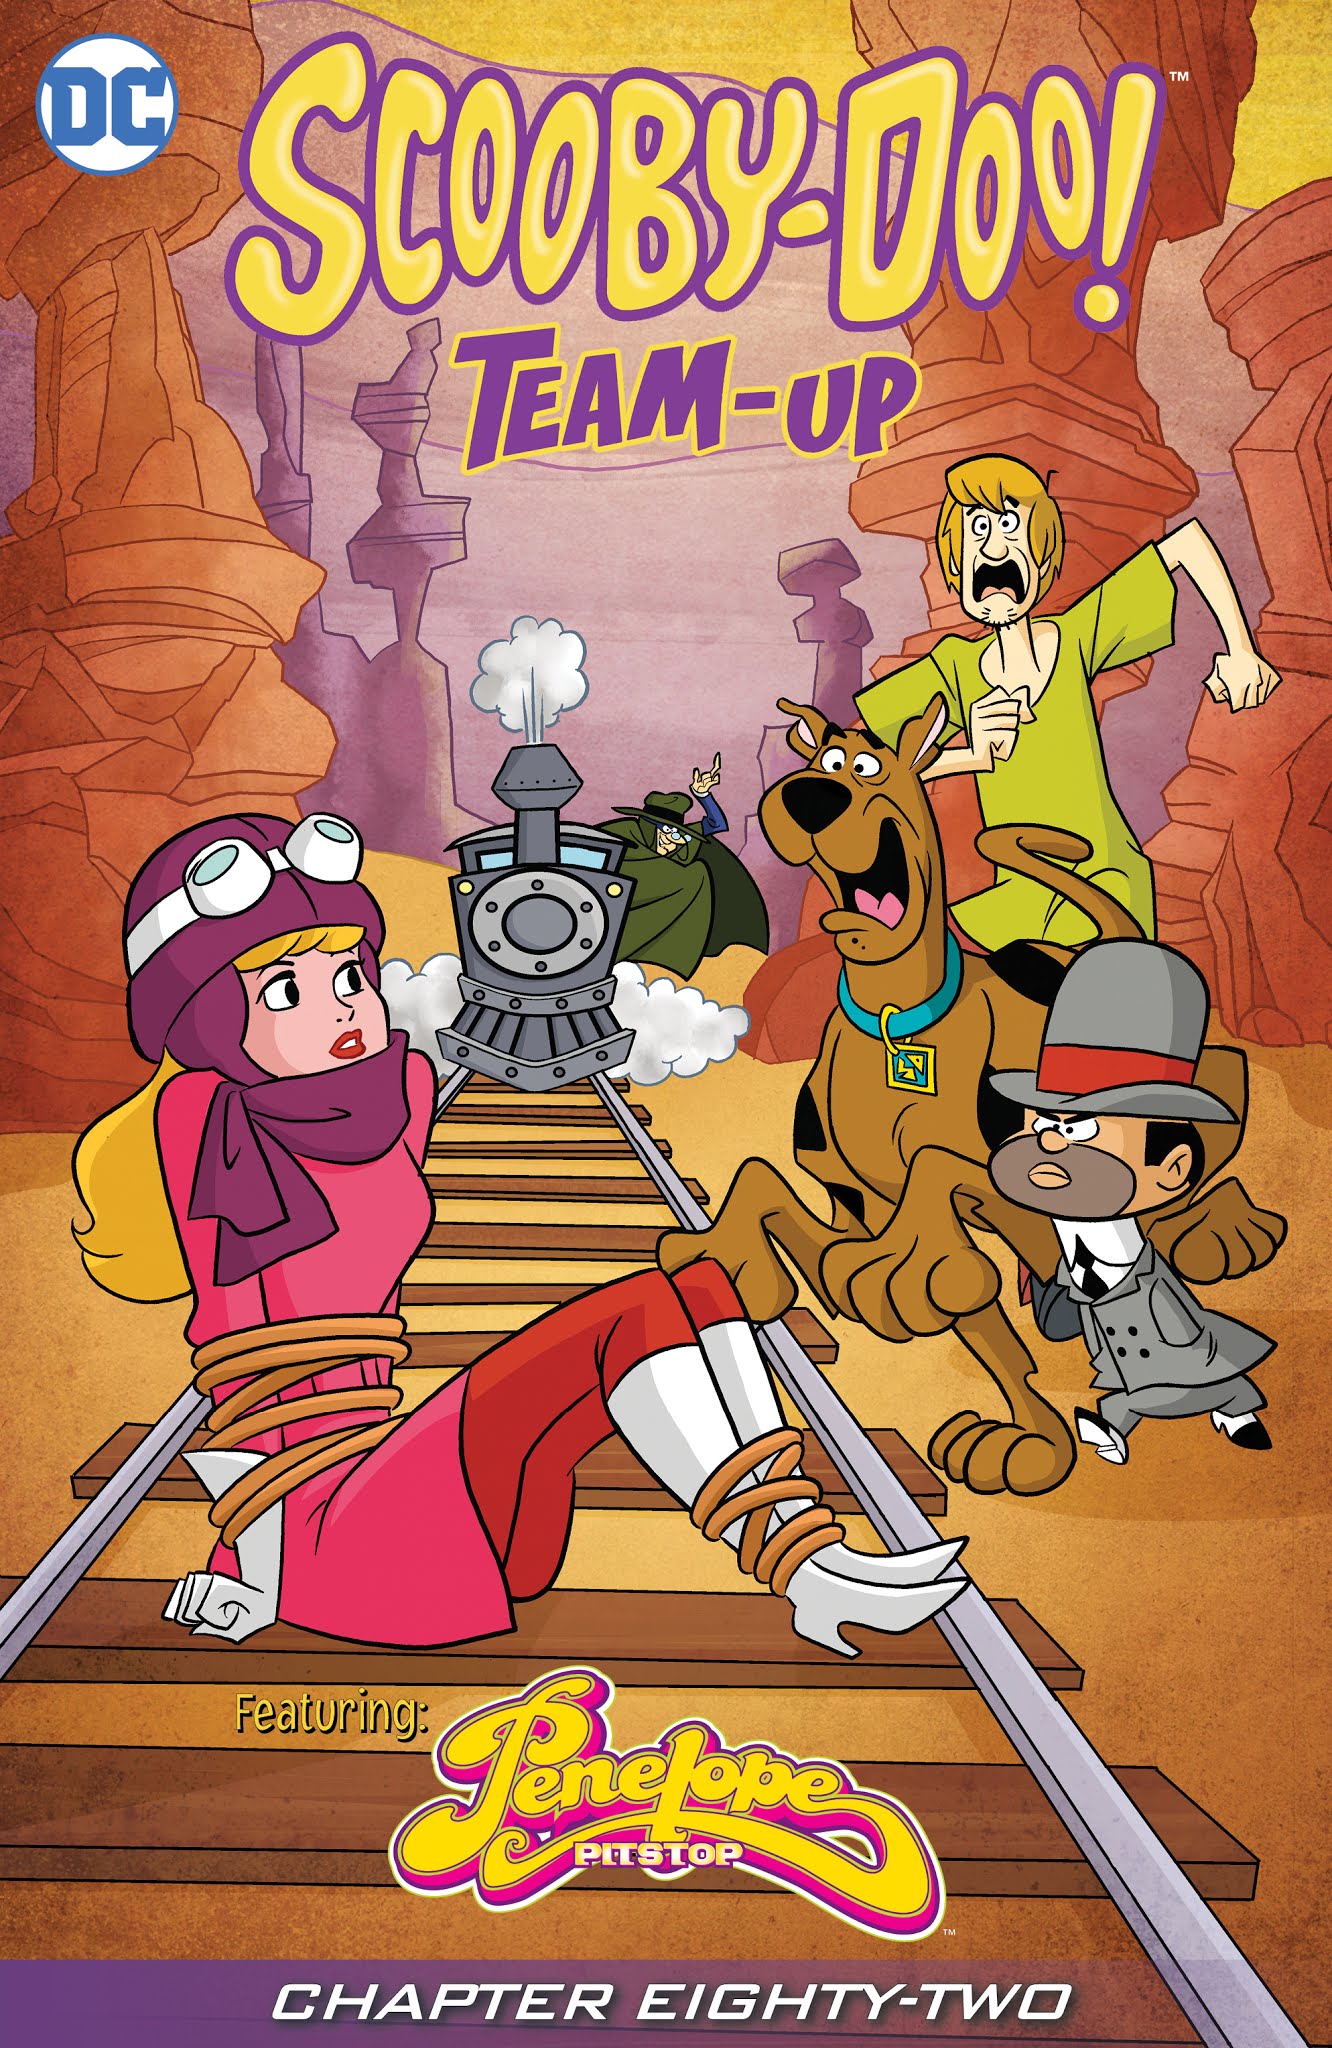 Scooby Doo Team Up Issue 82 | Read Scooby Doo Team Up Issue 82 comic online  in high quality. Read Full Comic online for free - Read comics online in  high quality .| READ COMIC ONLINE